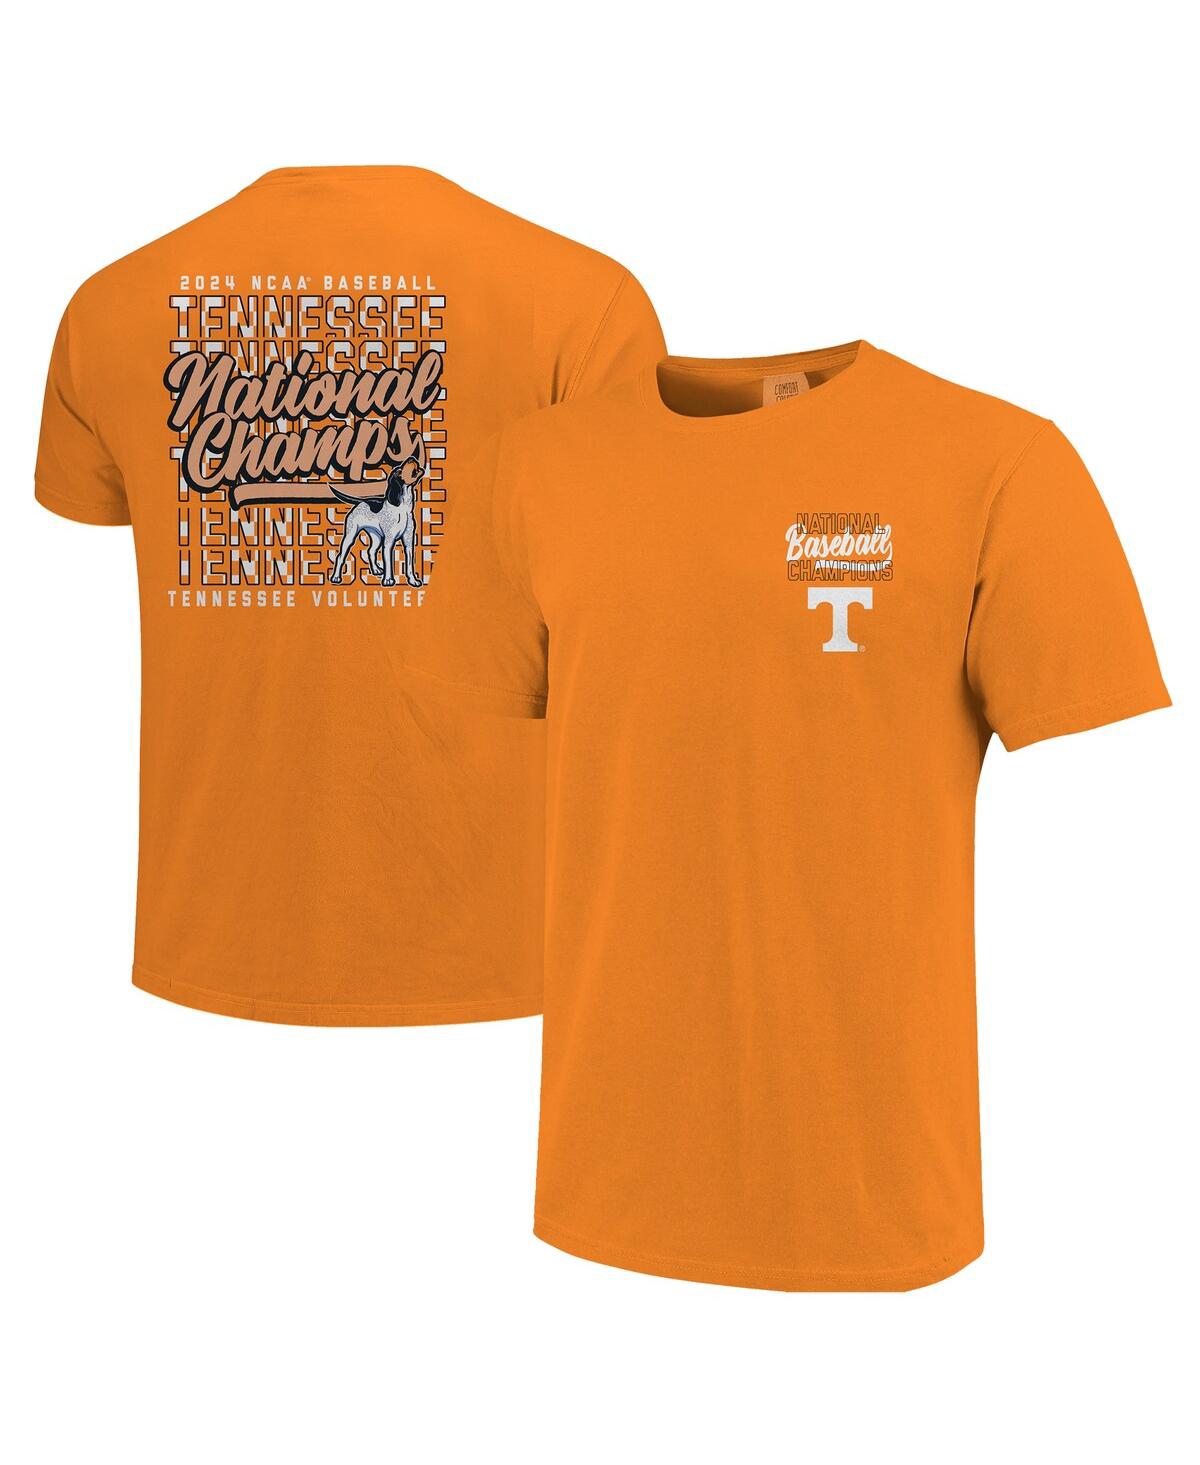 Women's Tennessee Orange Tennessee Volunteers 2024 Ncaa Men's Baseball College World Series Champions Comfort Colors Stack T-Shirt - Tenness